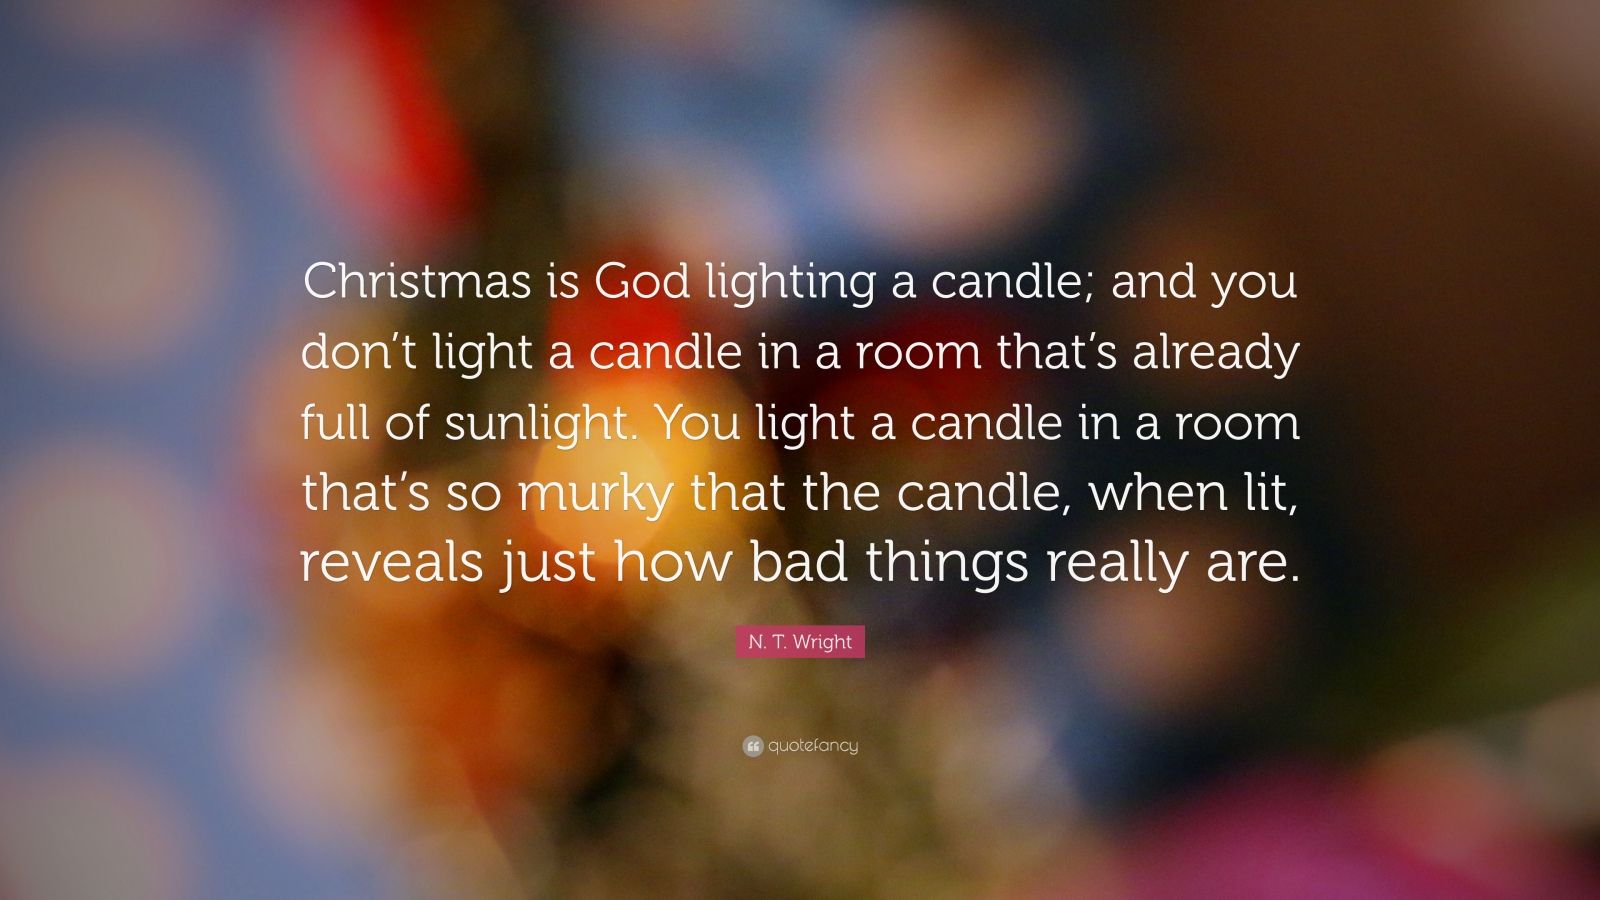 N. T. Wright Quote: “Christmas is God lighting a candle; and you don’t